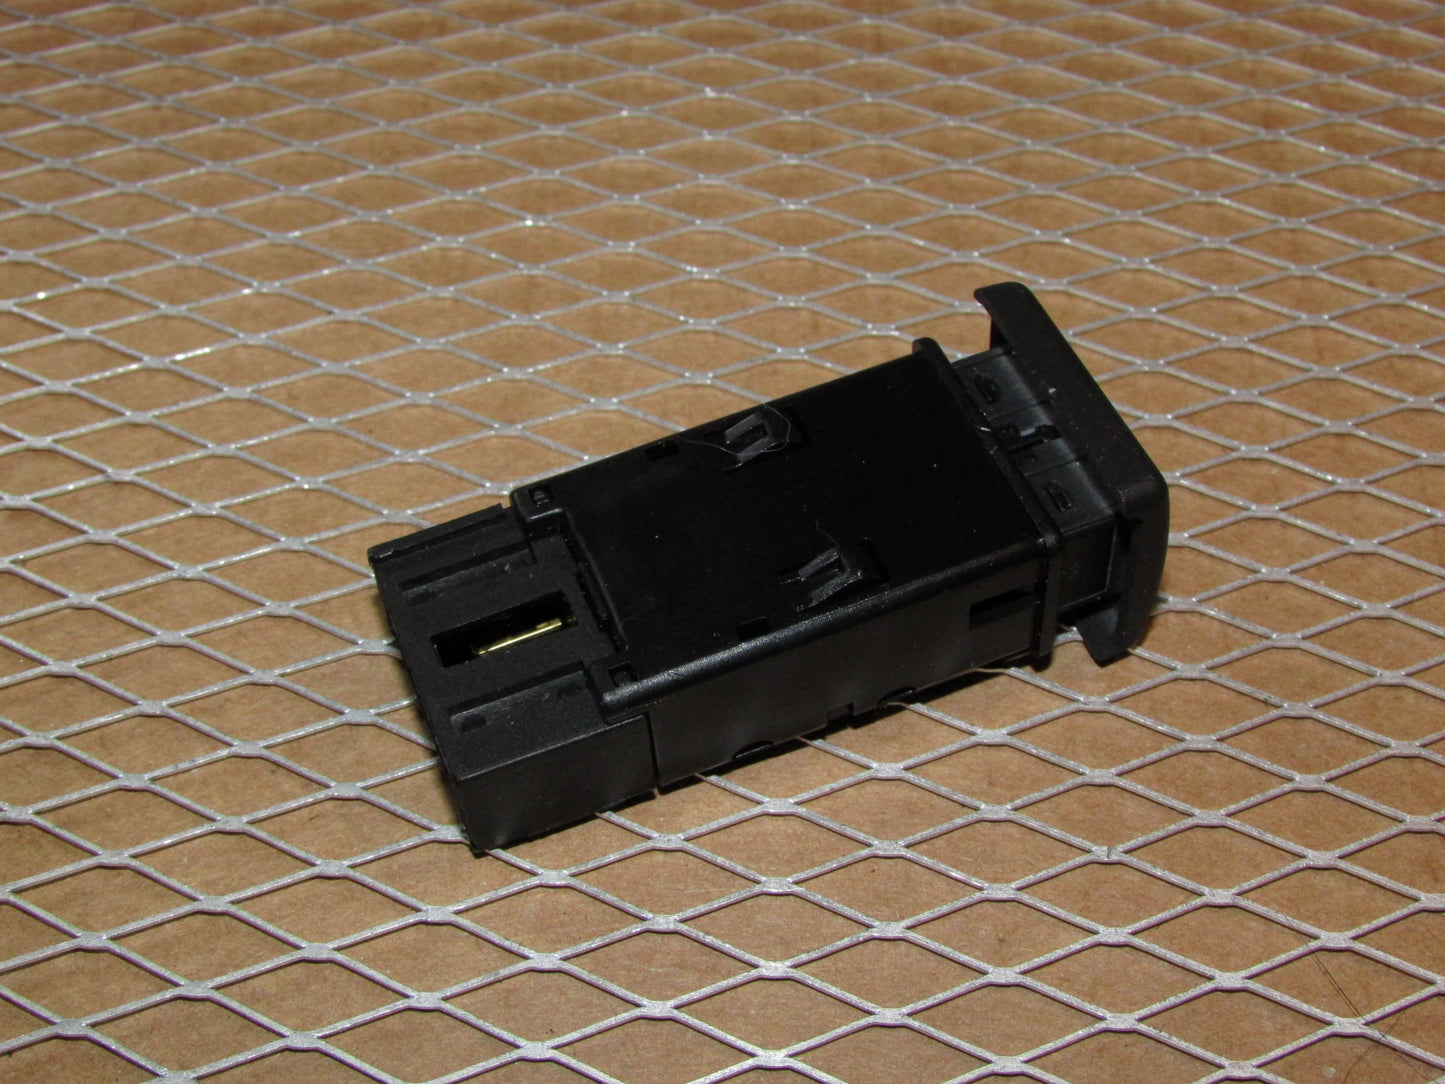 03 04 Land Rover Discovery 2 OEM Hazard Light Switch